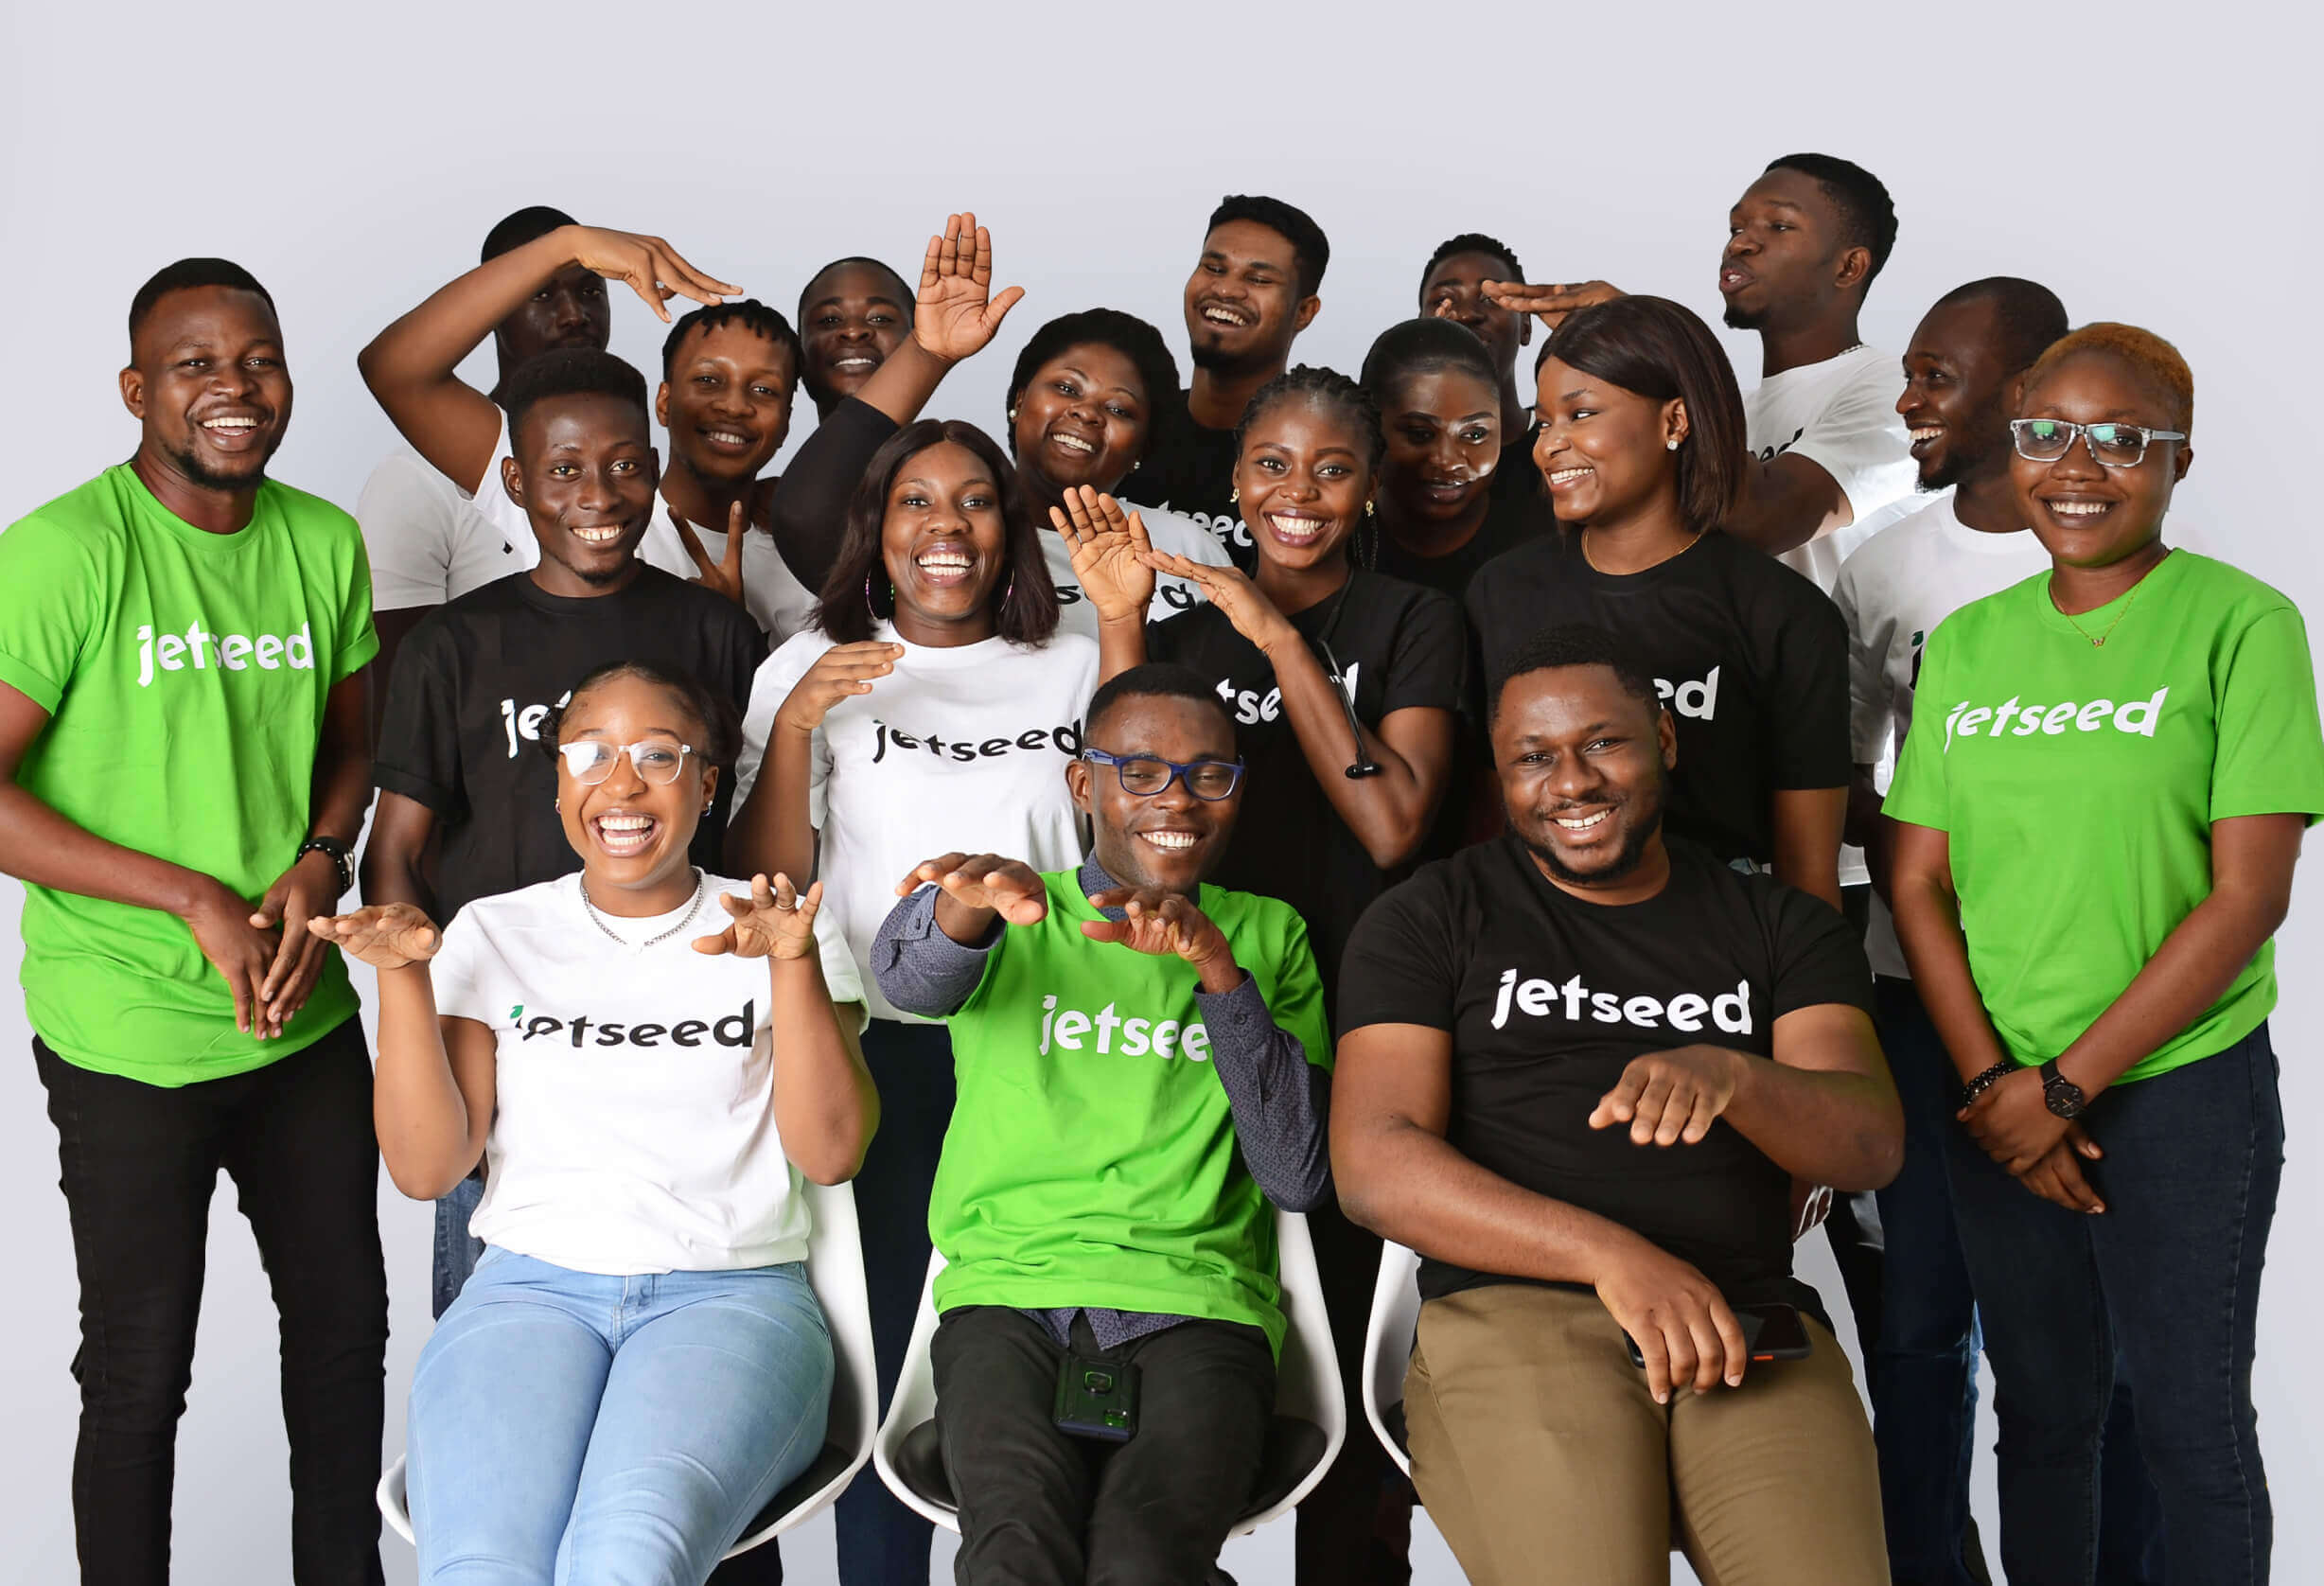 Jetseed, buy airtime and data online